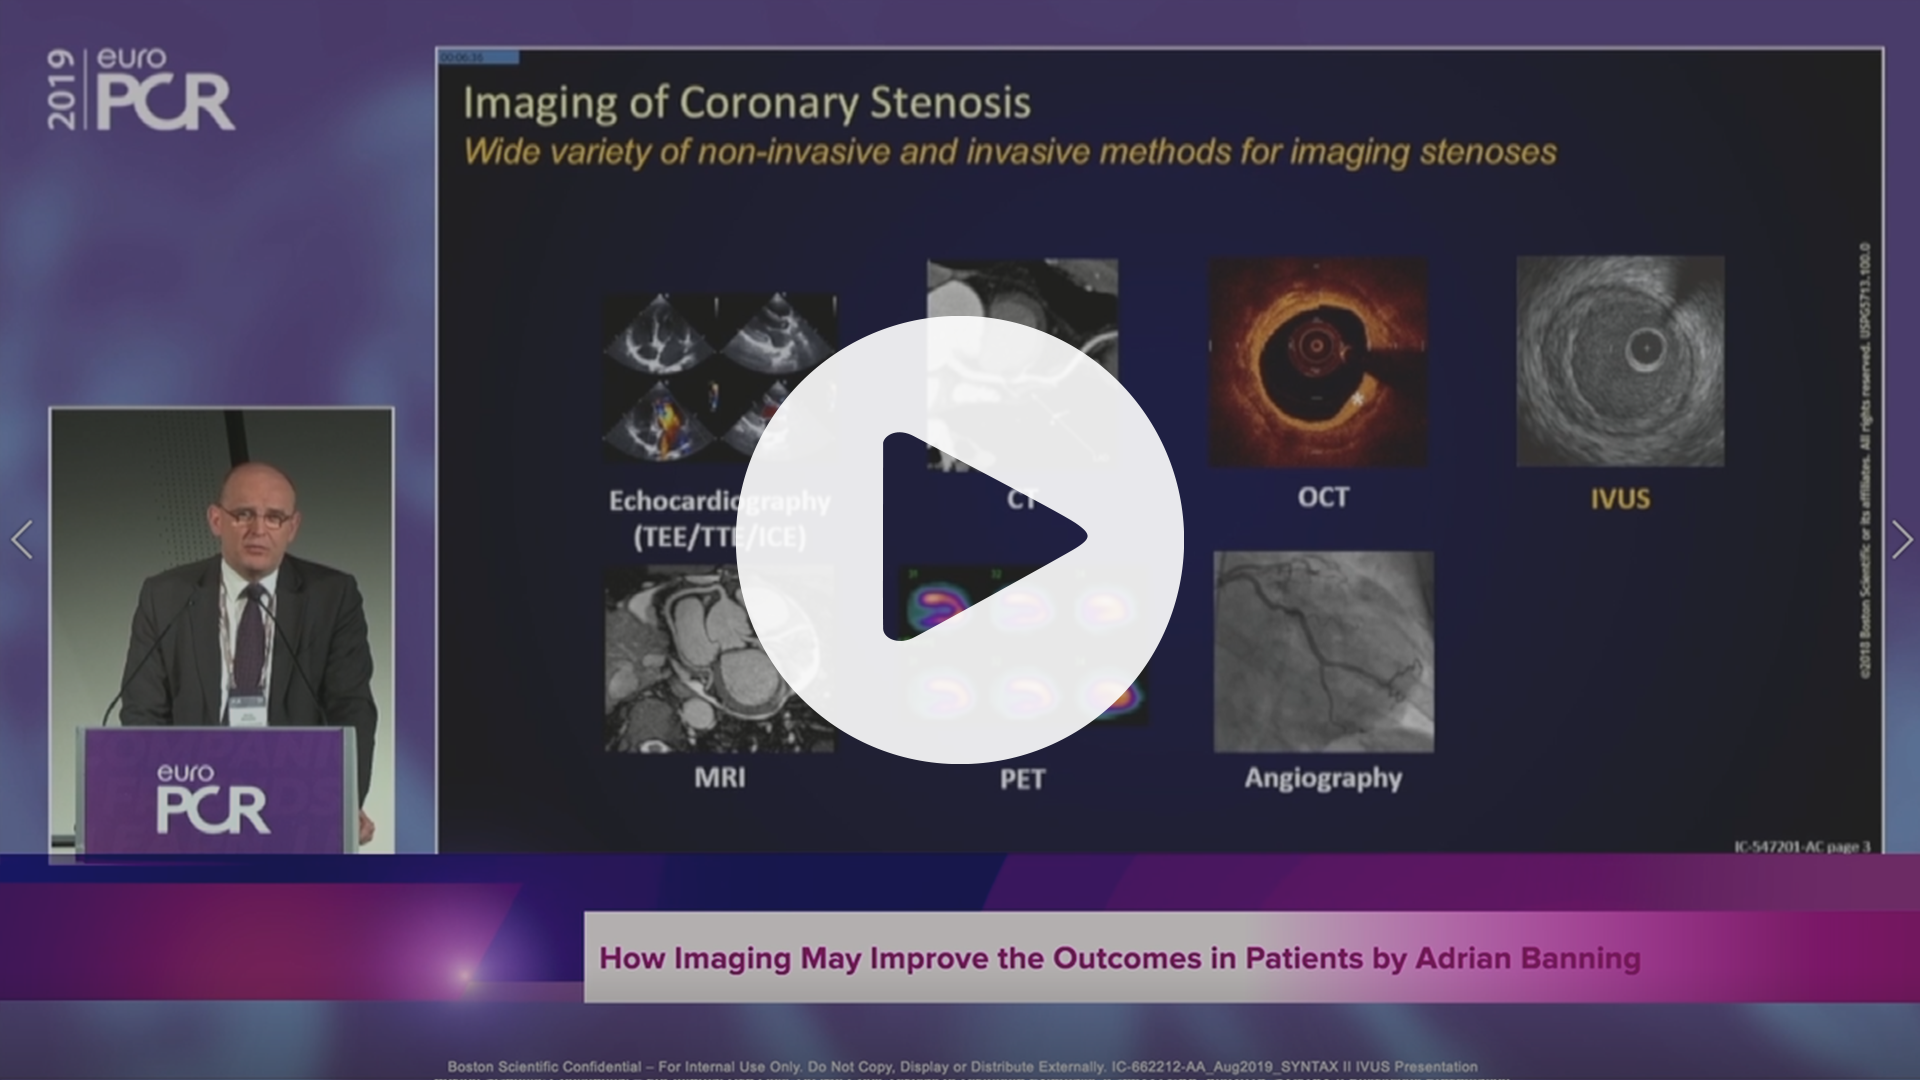 SYNTAX II How Imaging May Improve the Outcomes in Patients by Adrian Banning, VIdeo